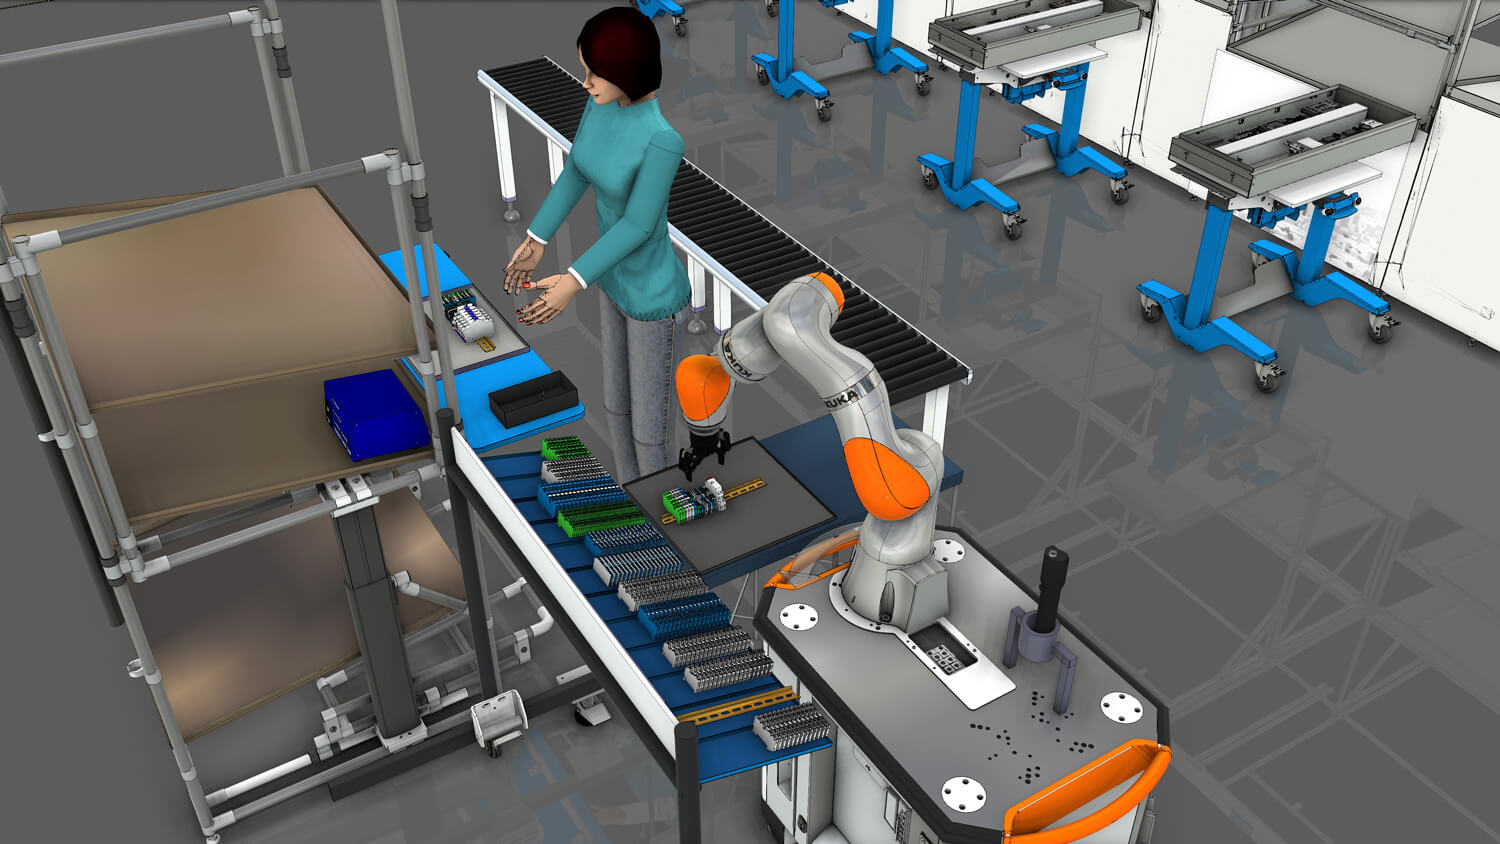 Simulation of a person working together with a robot at a production line